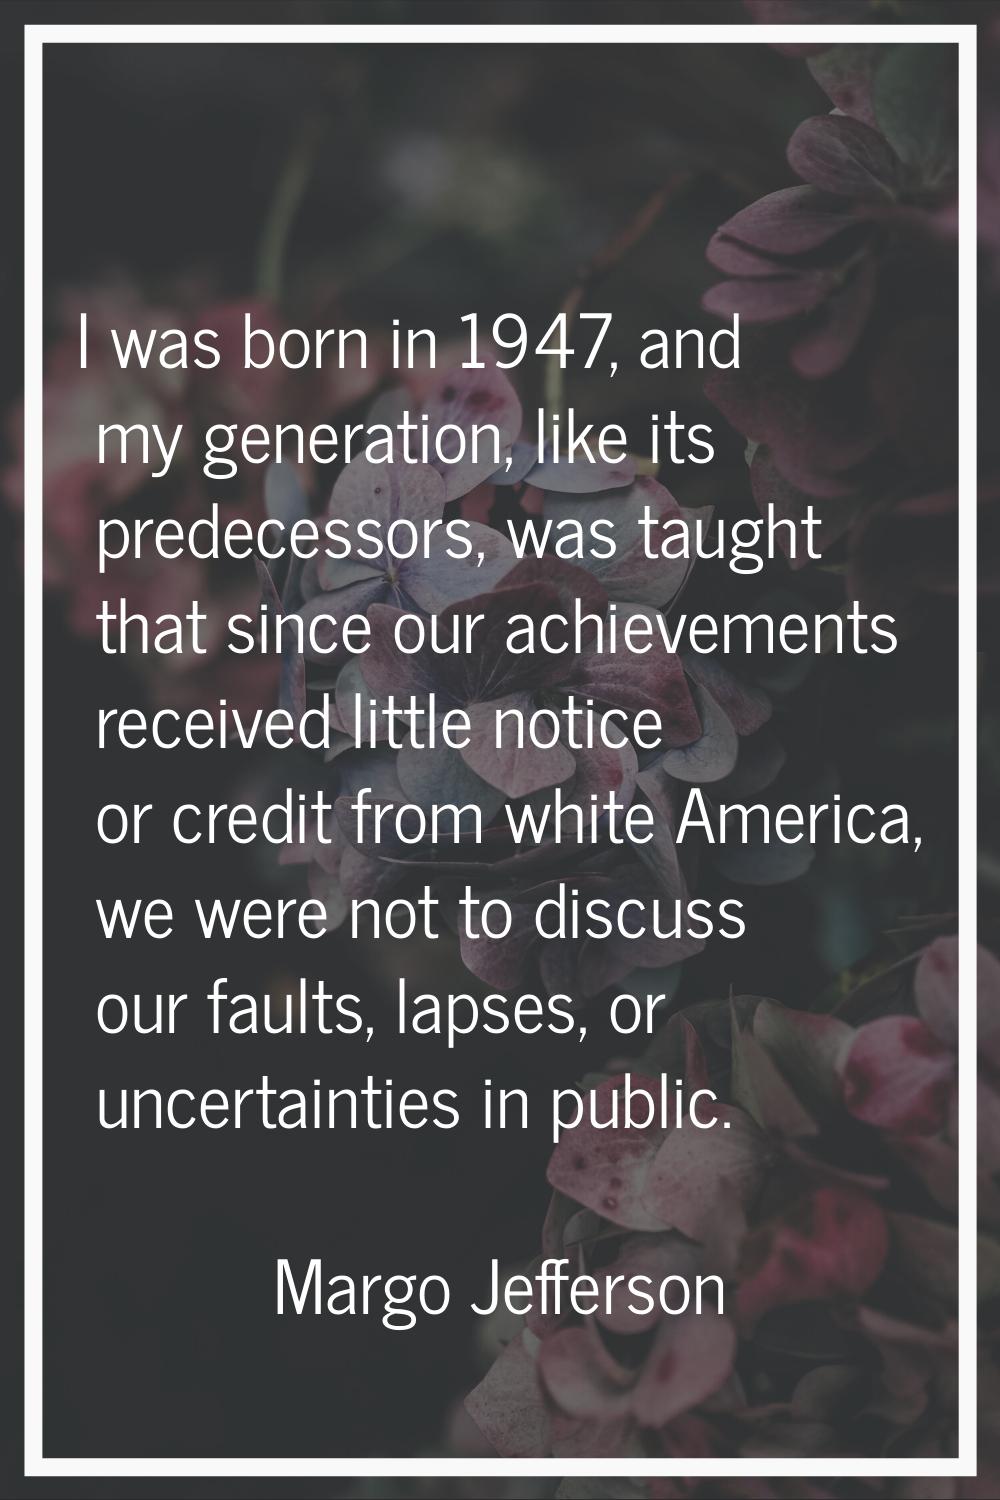 I was born in 1947, and my generation, like its predecessors, was taught that since our achievement